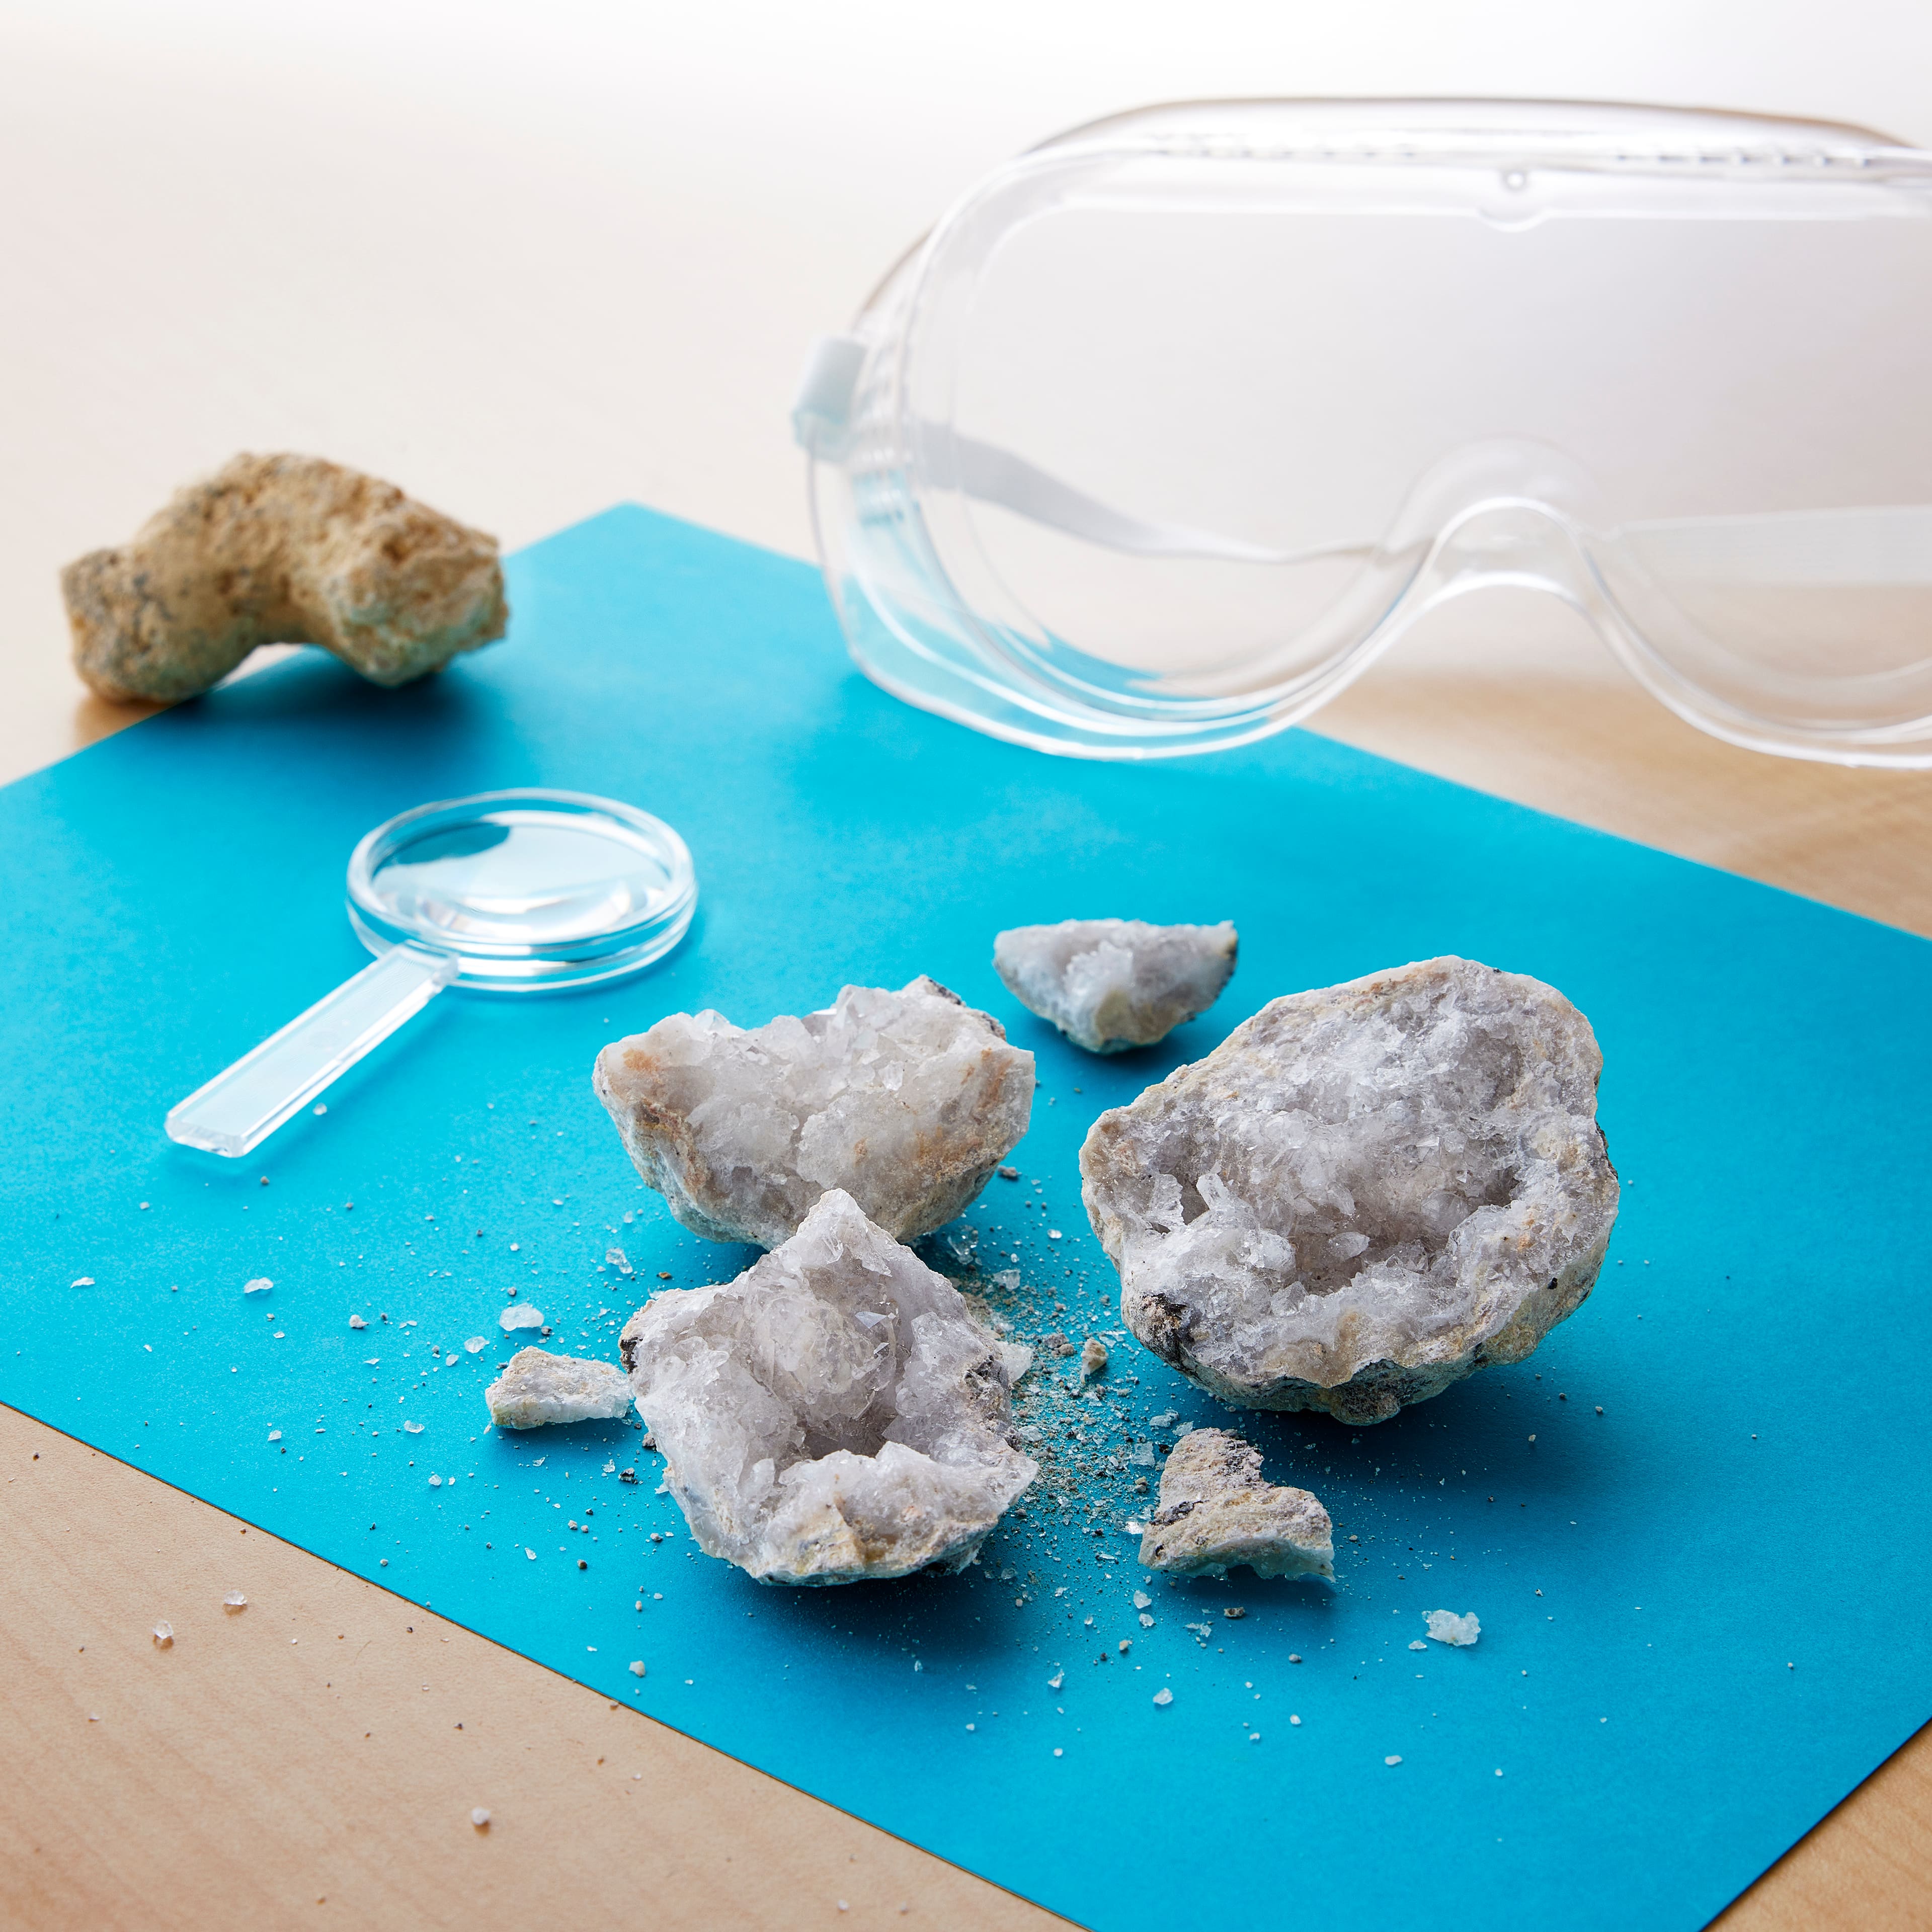 Find the National Geographic© Break Open Geodes Science Kit at